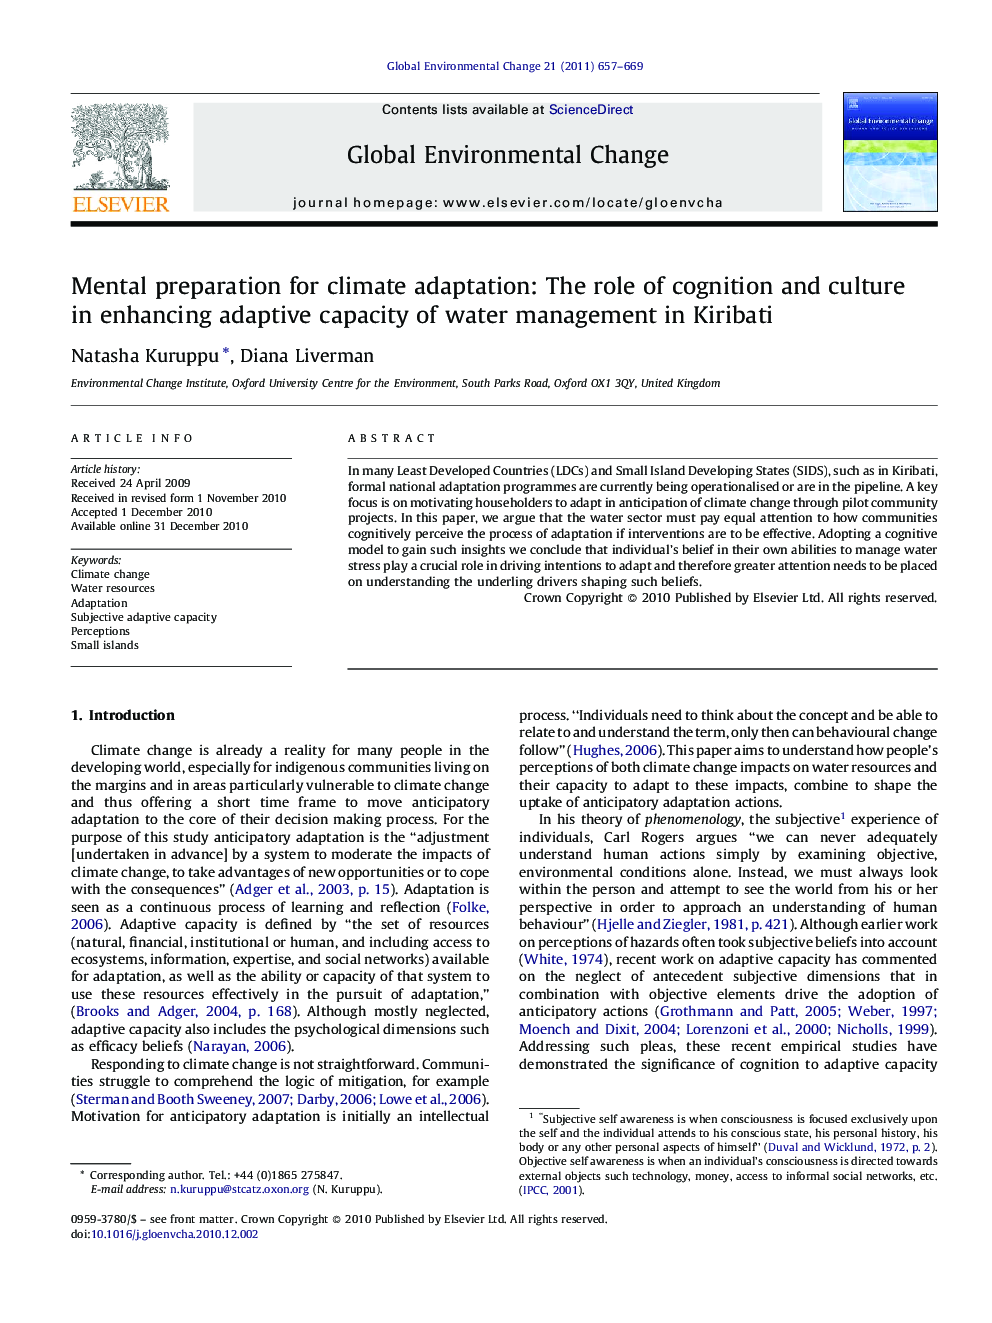 Mental preparation for climate adaptation: The role of cognition and culture in enhancing adaptive capacity of water management in Kiribati